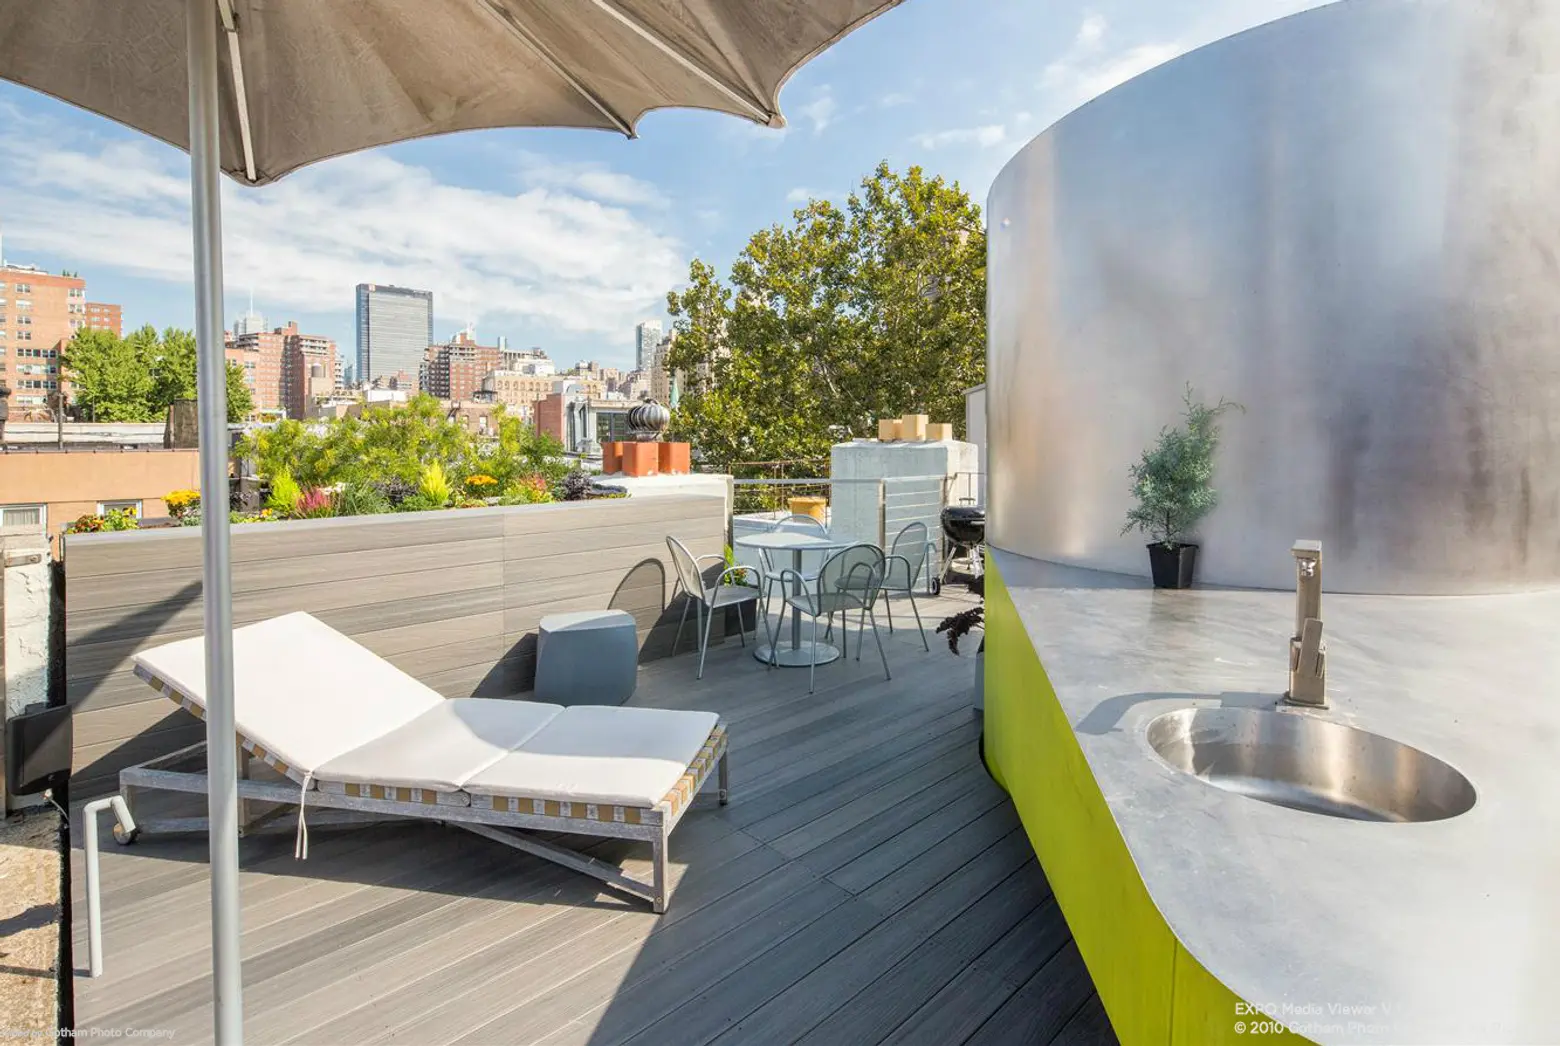 365 West 19th Street, Cool listing, Chelsea, NYC co-op for sale, Interiors, Contemporary Interiors, Penthouse